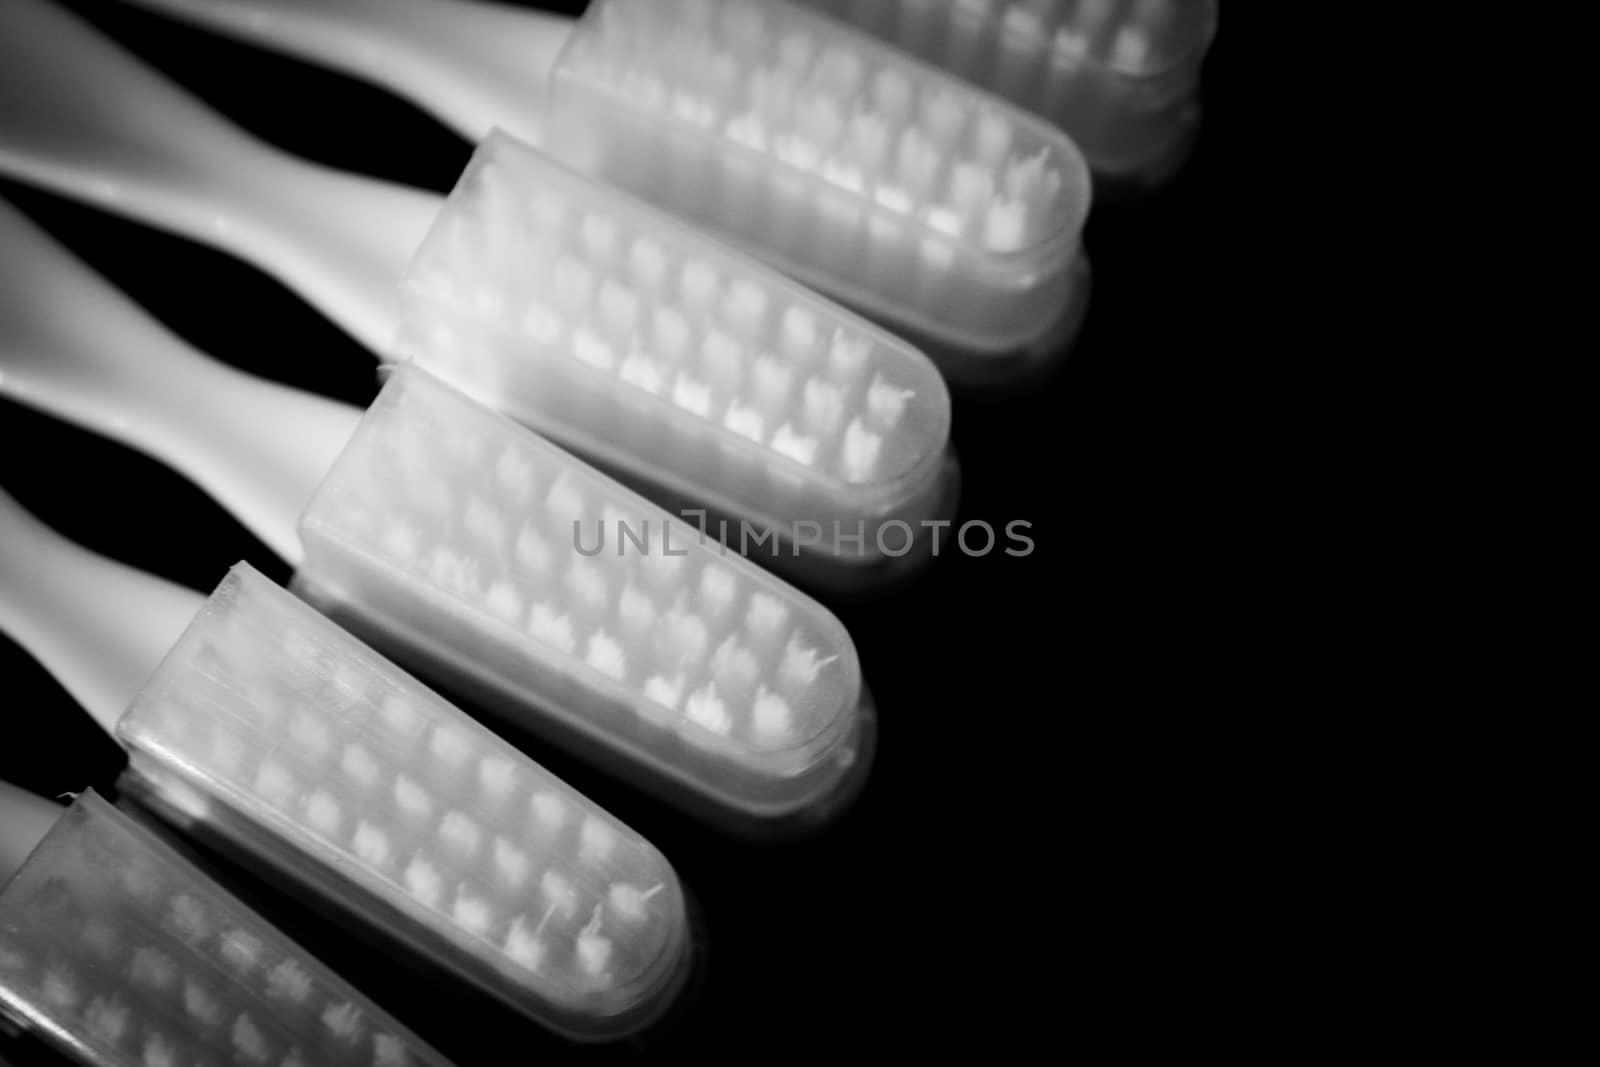 Toothbrushes heads by Gema Ibarra by GemaIbarra